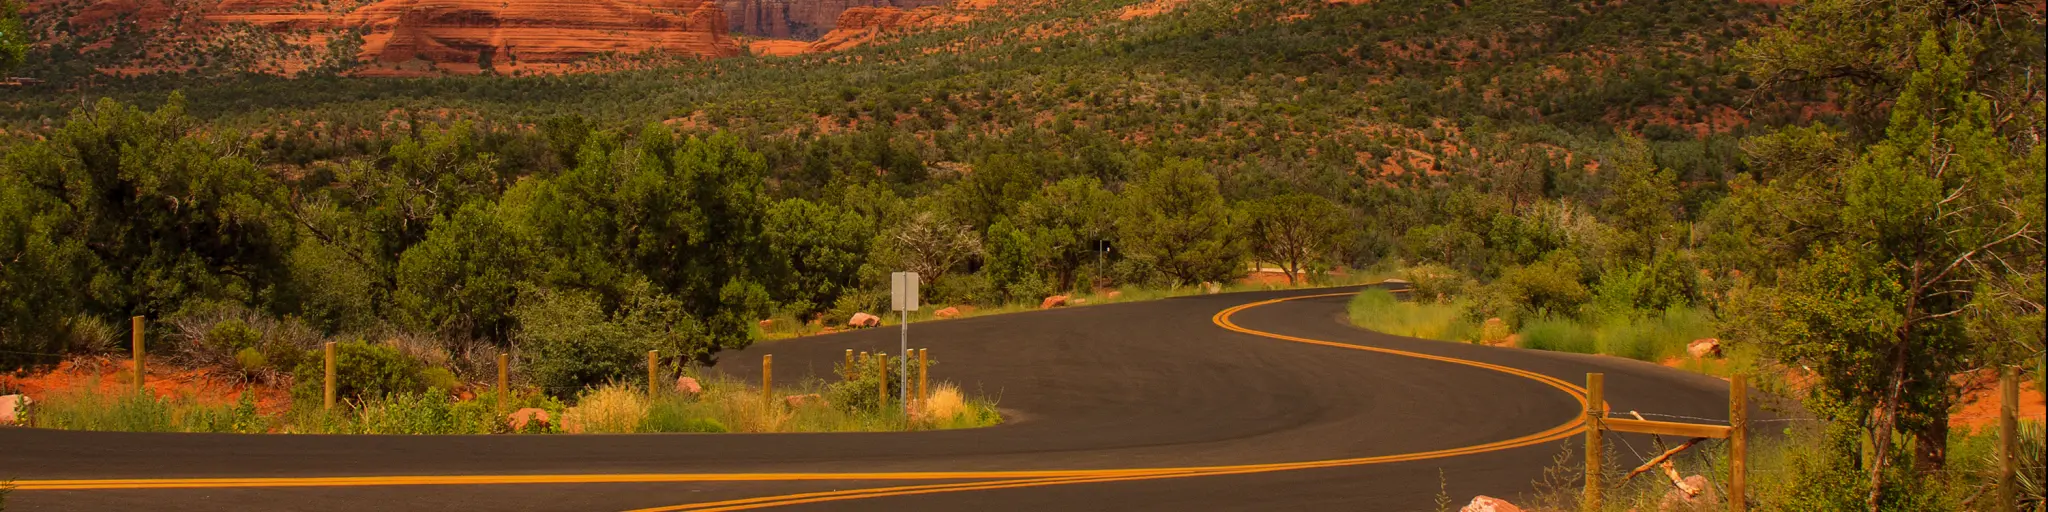 An image of an empty road in Sedona, Arizona during sunset with trees and a view of mountains.